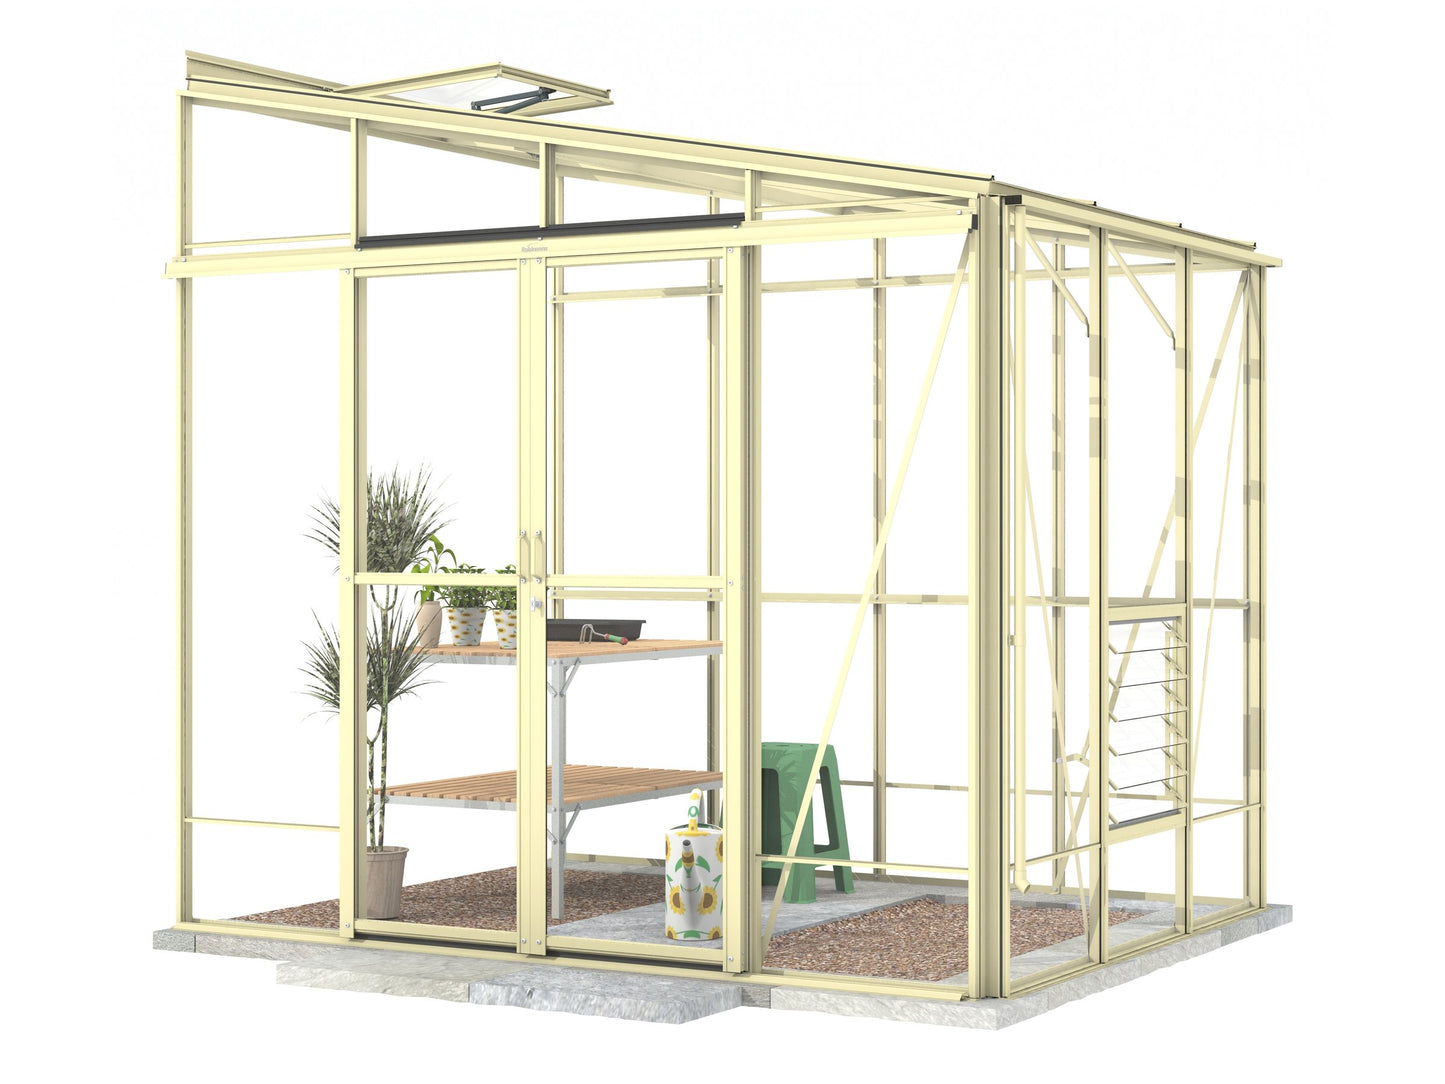 Robinsons 8ft wide LEAN-TO